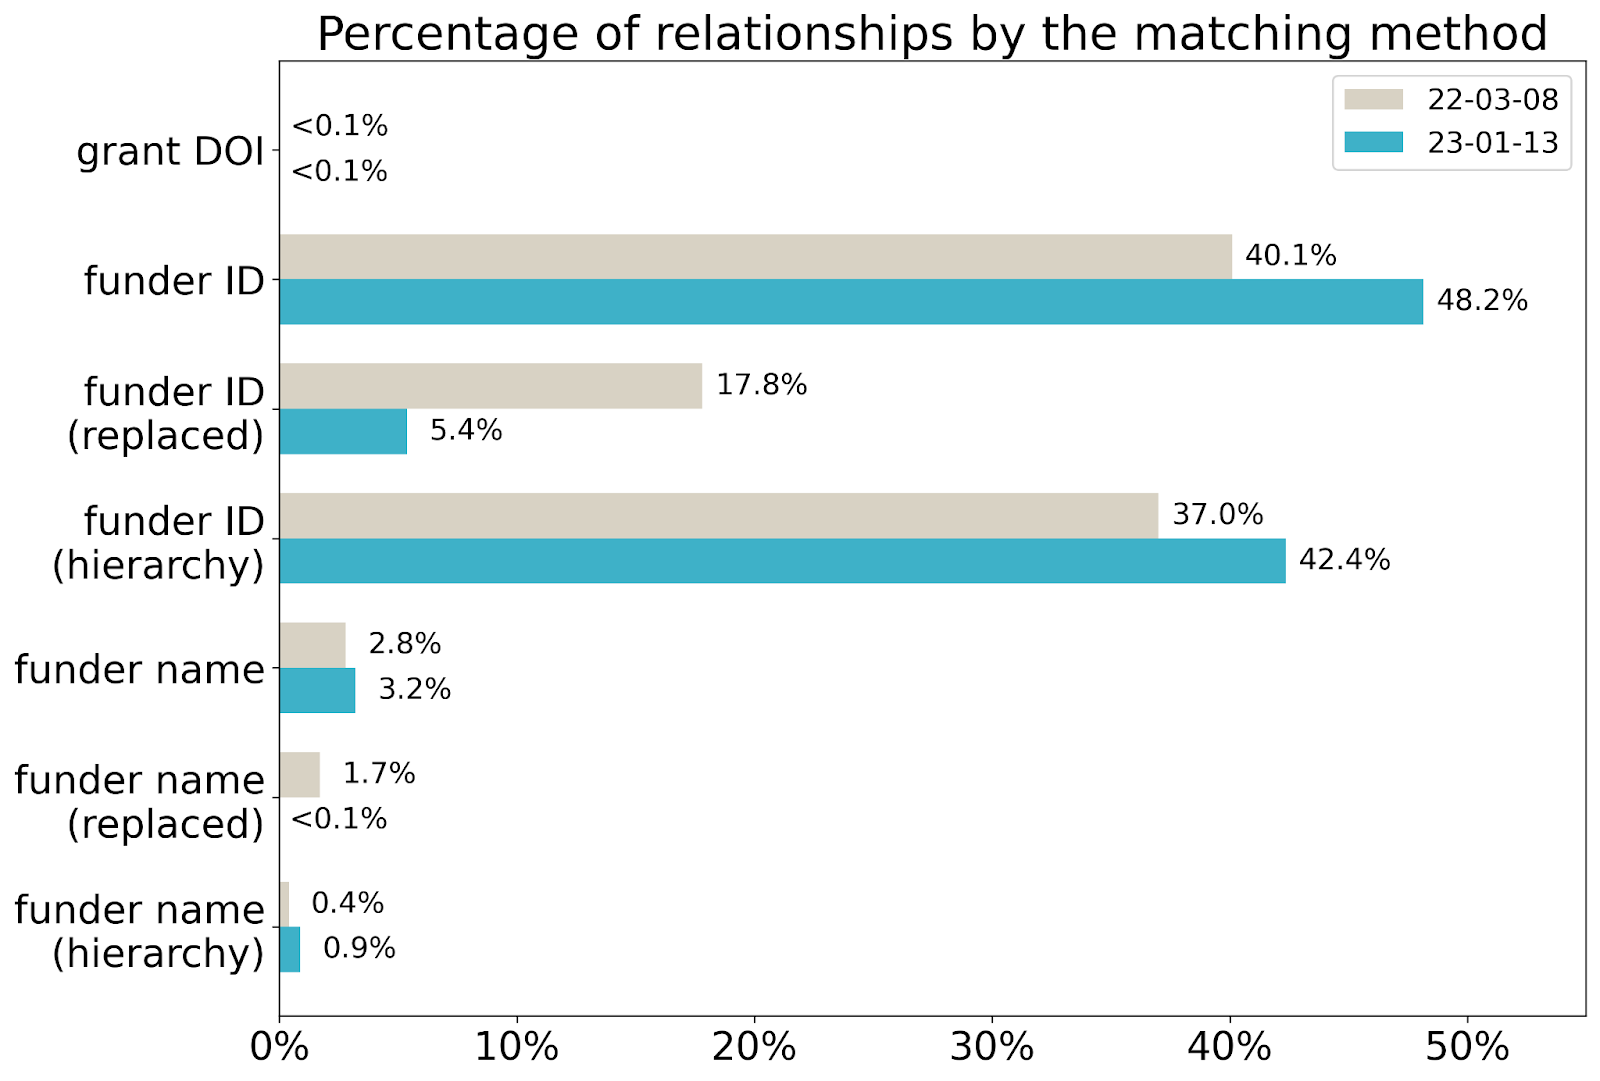 Graph titled percentage of relationships by the matching method comparing the breakdowns of all established relationships by the matching method.